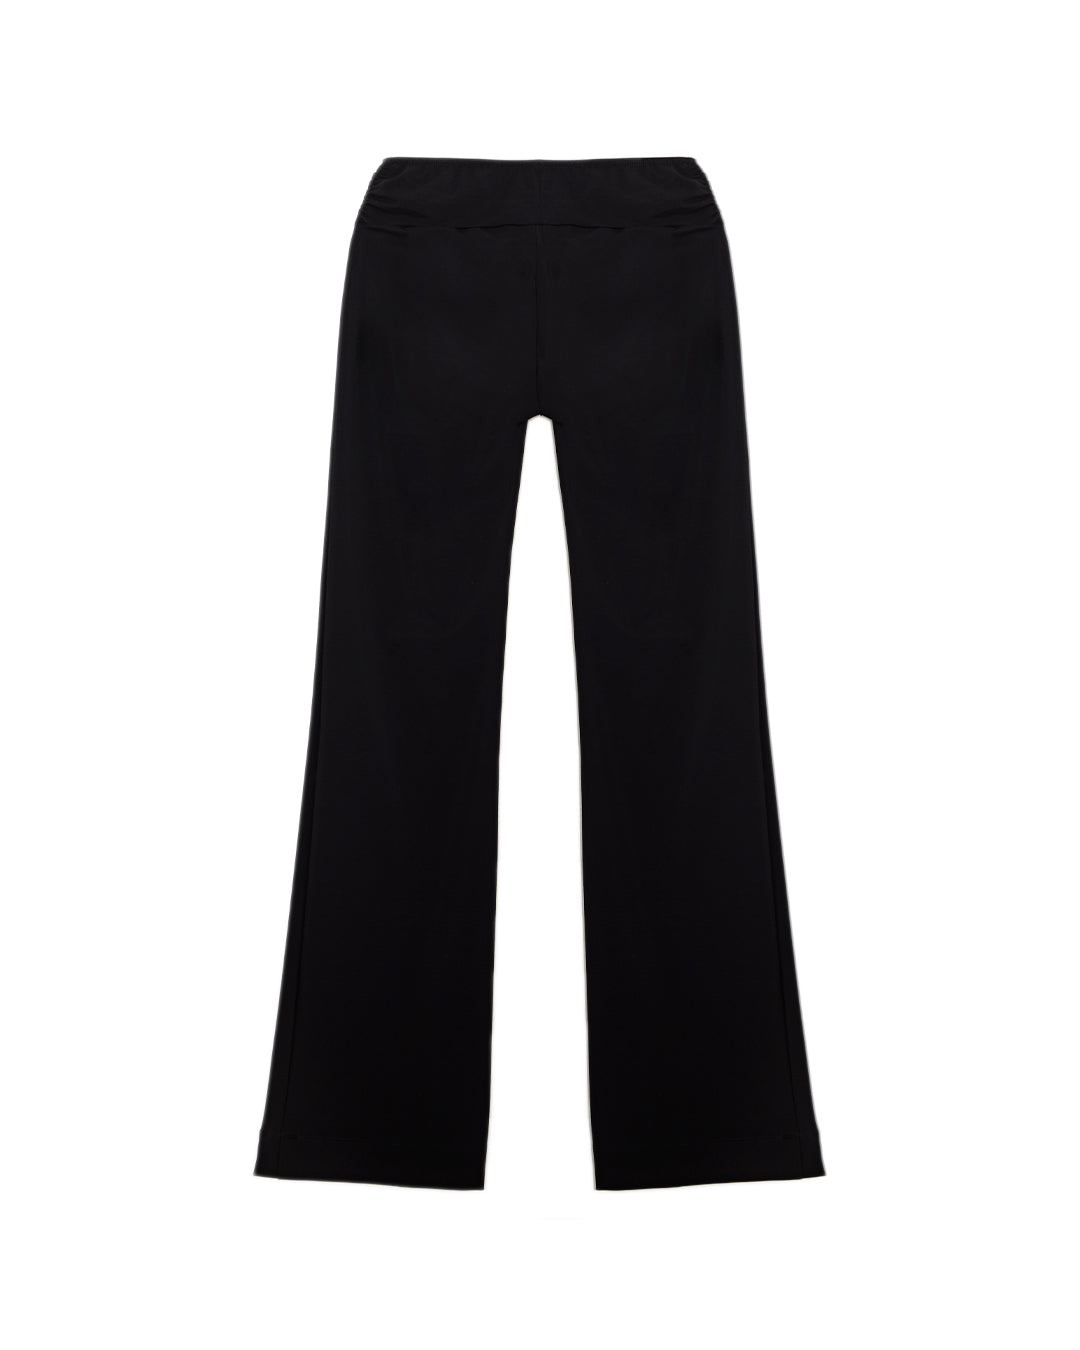 ALL IS A GENTLE SPRING - The Stretch Trouser Pitch Black